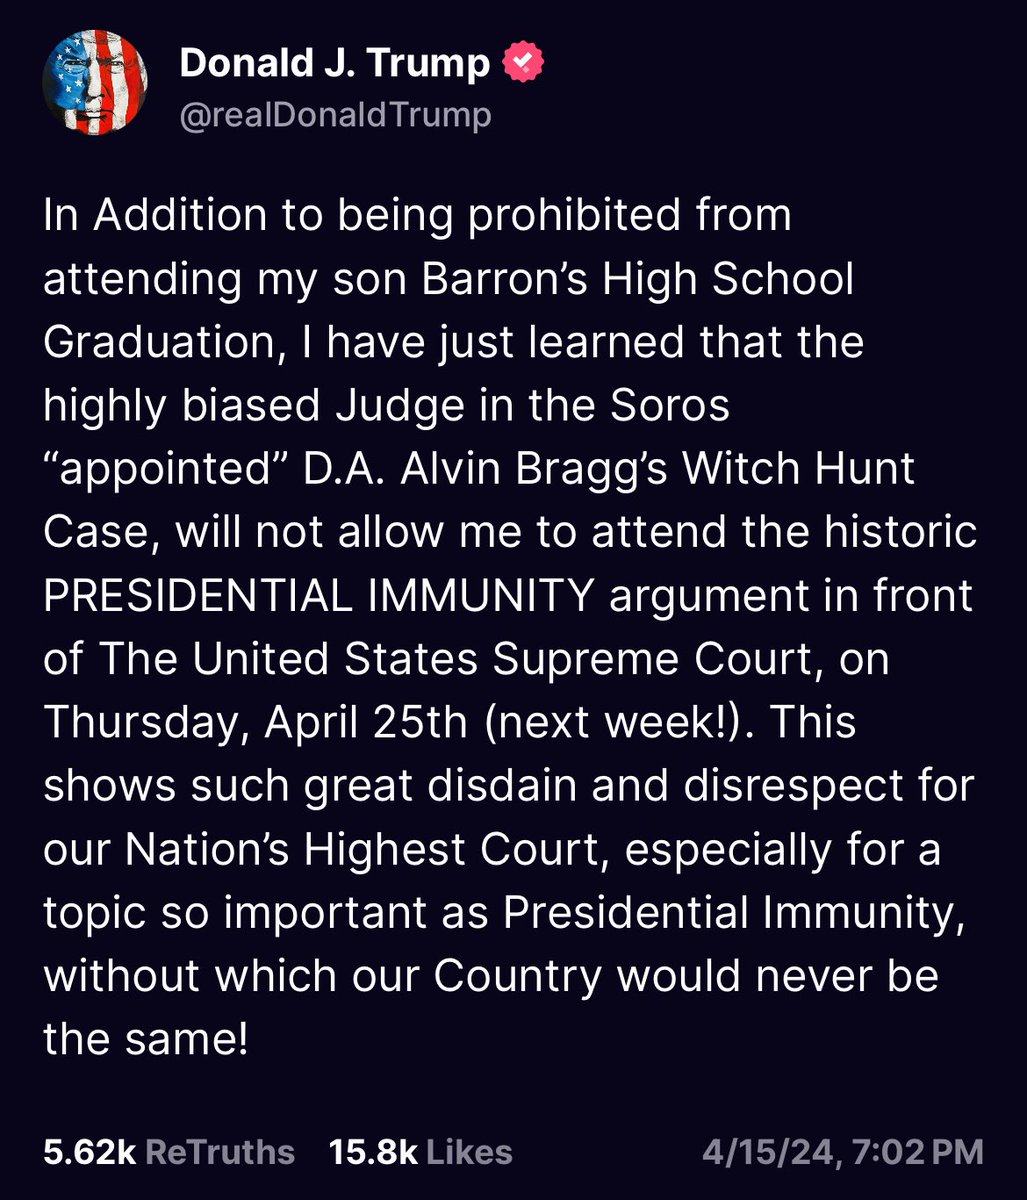 “The judge will also not let me take off the day for National Velociraptor Awareness Day or Ellis island family history day!”

If you can’t tell he’s trying to drag this out with as many days off for trial as he can get 😂